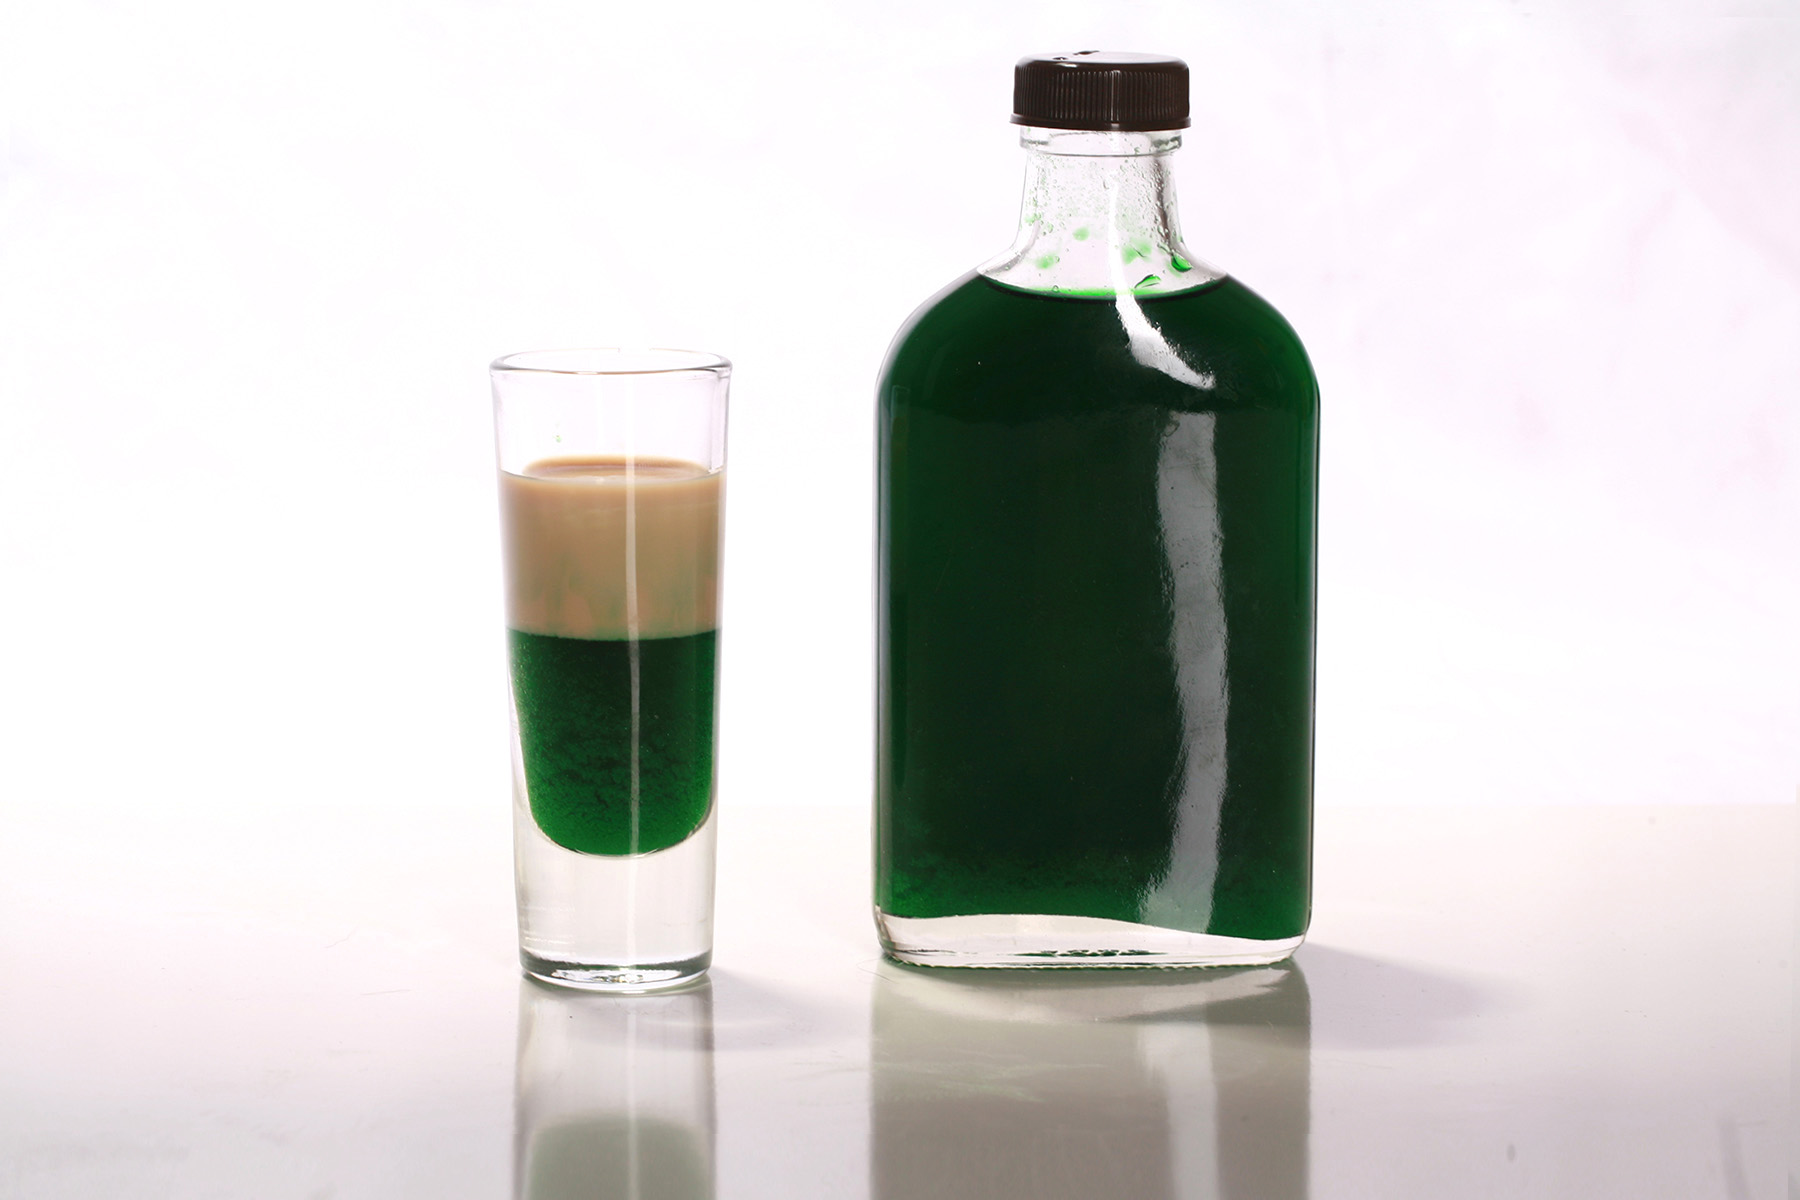 A layered shot glass of sugar-free creme de menthe and keto Irish cream next to a small bottle of low carb creme de menthe.